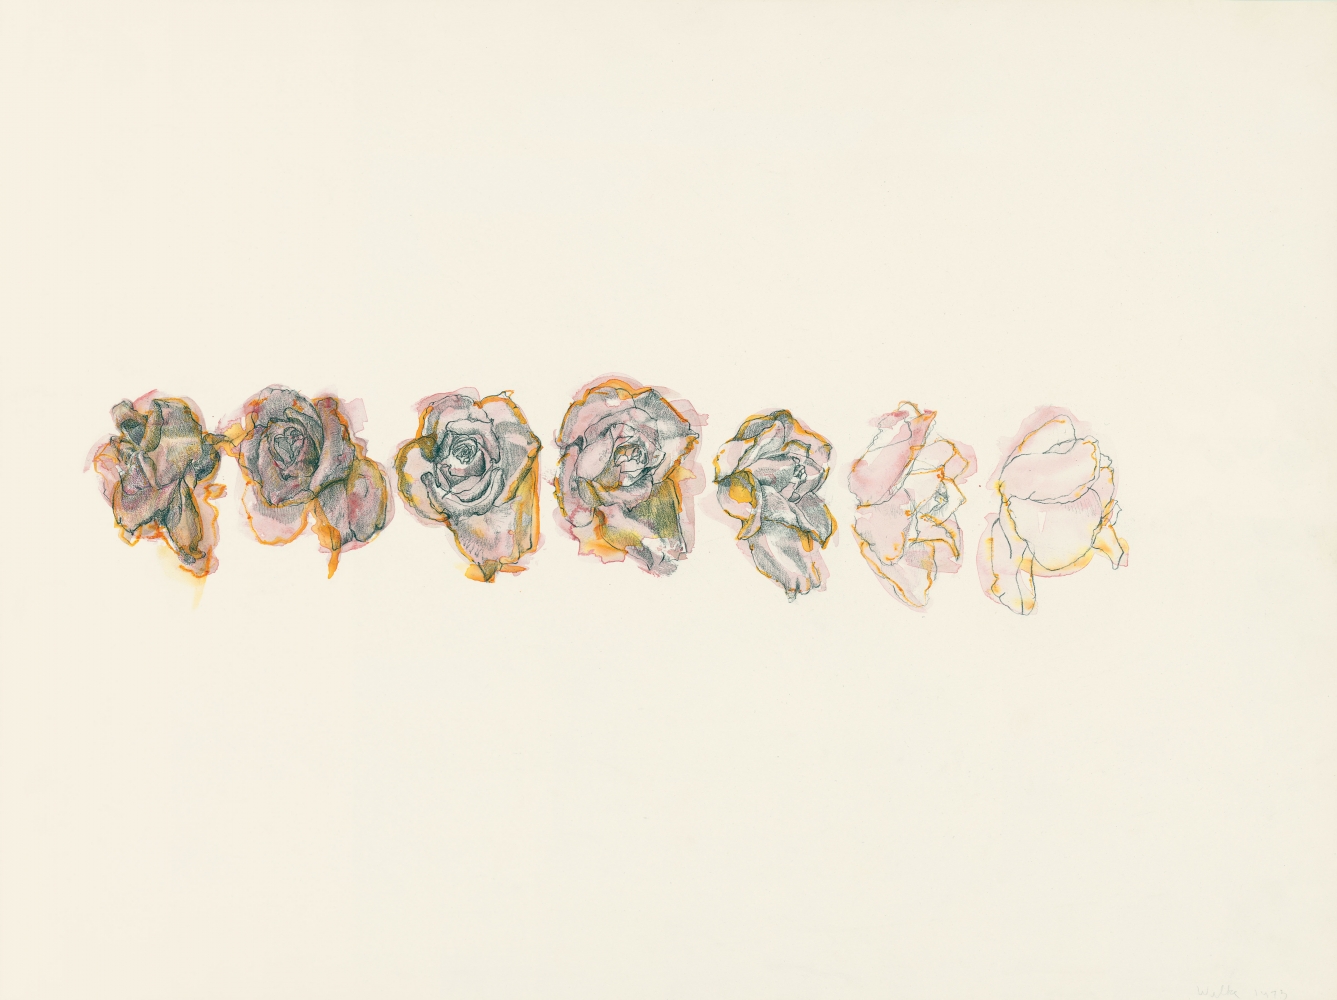 Hannah Wilke
Roses, 1975
Watercolor and pencil on paper
18 &amp;times; 24 inches (45.7 &amp;times; 61 cm)
Hannah Wilke Collection &amp;amp; Archive, Los Angeles.
Courtesy Alison Jacques, London.
Photo: Andrew Scharlatt.